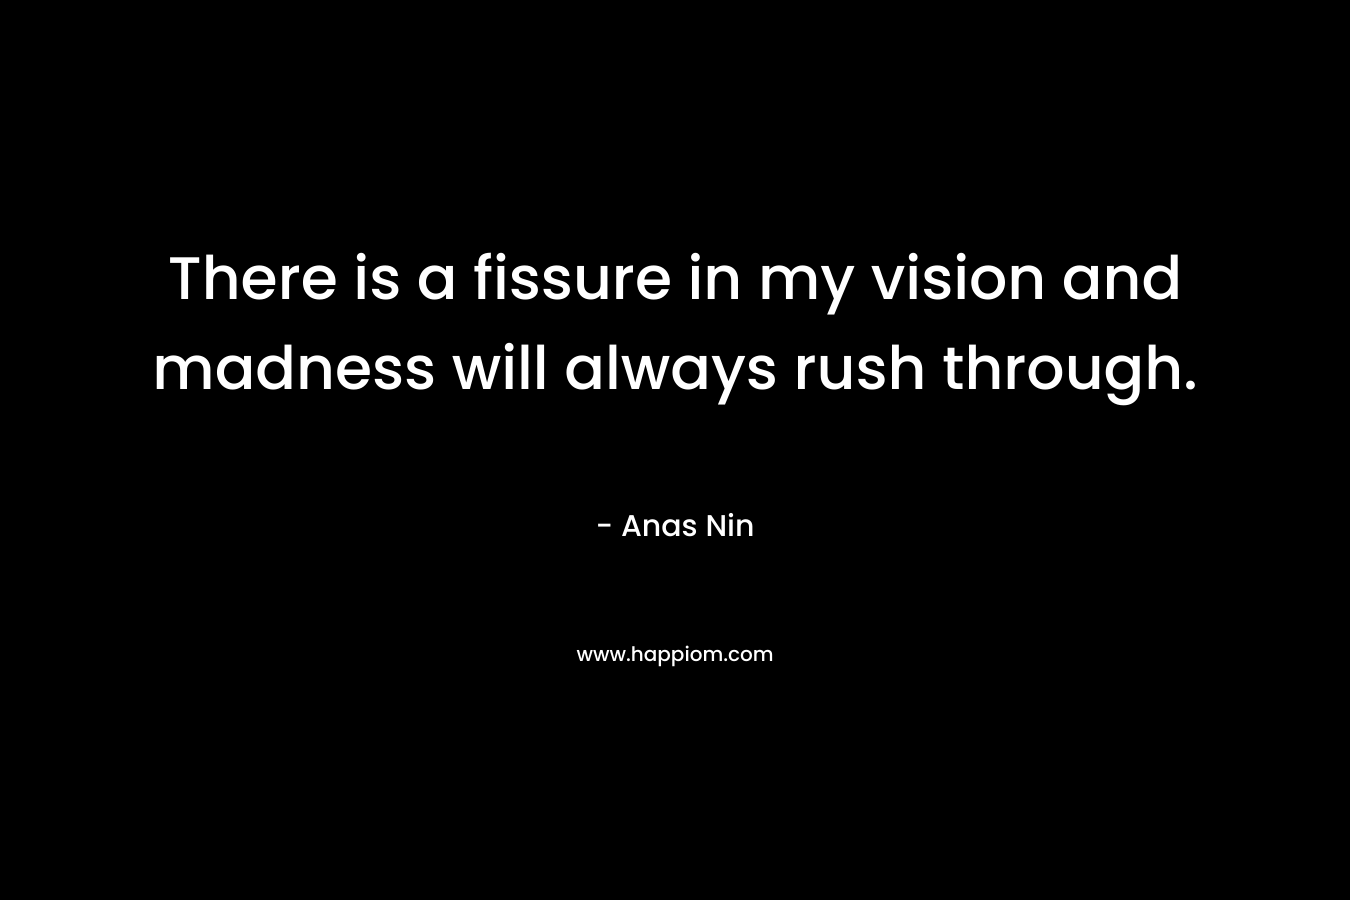 There is a fissure in my vision and madness will always rush through. – Anas Nin